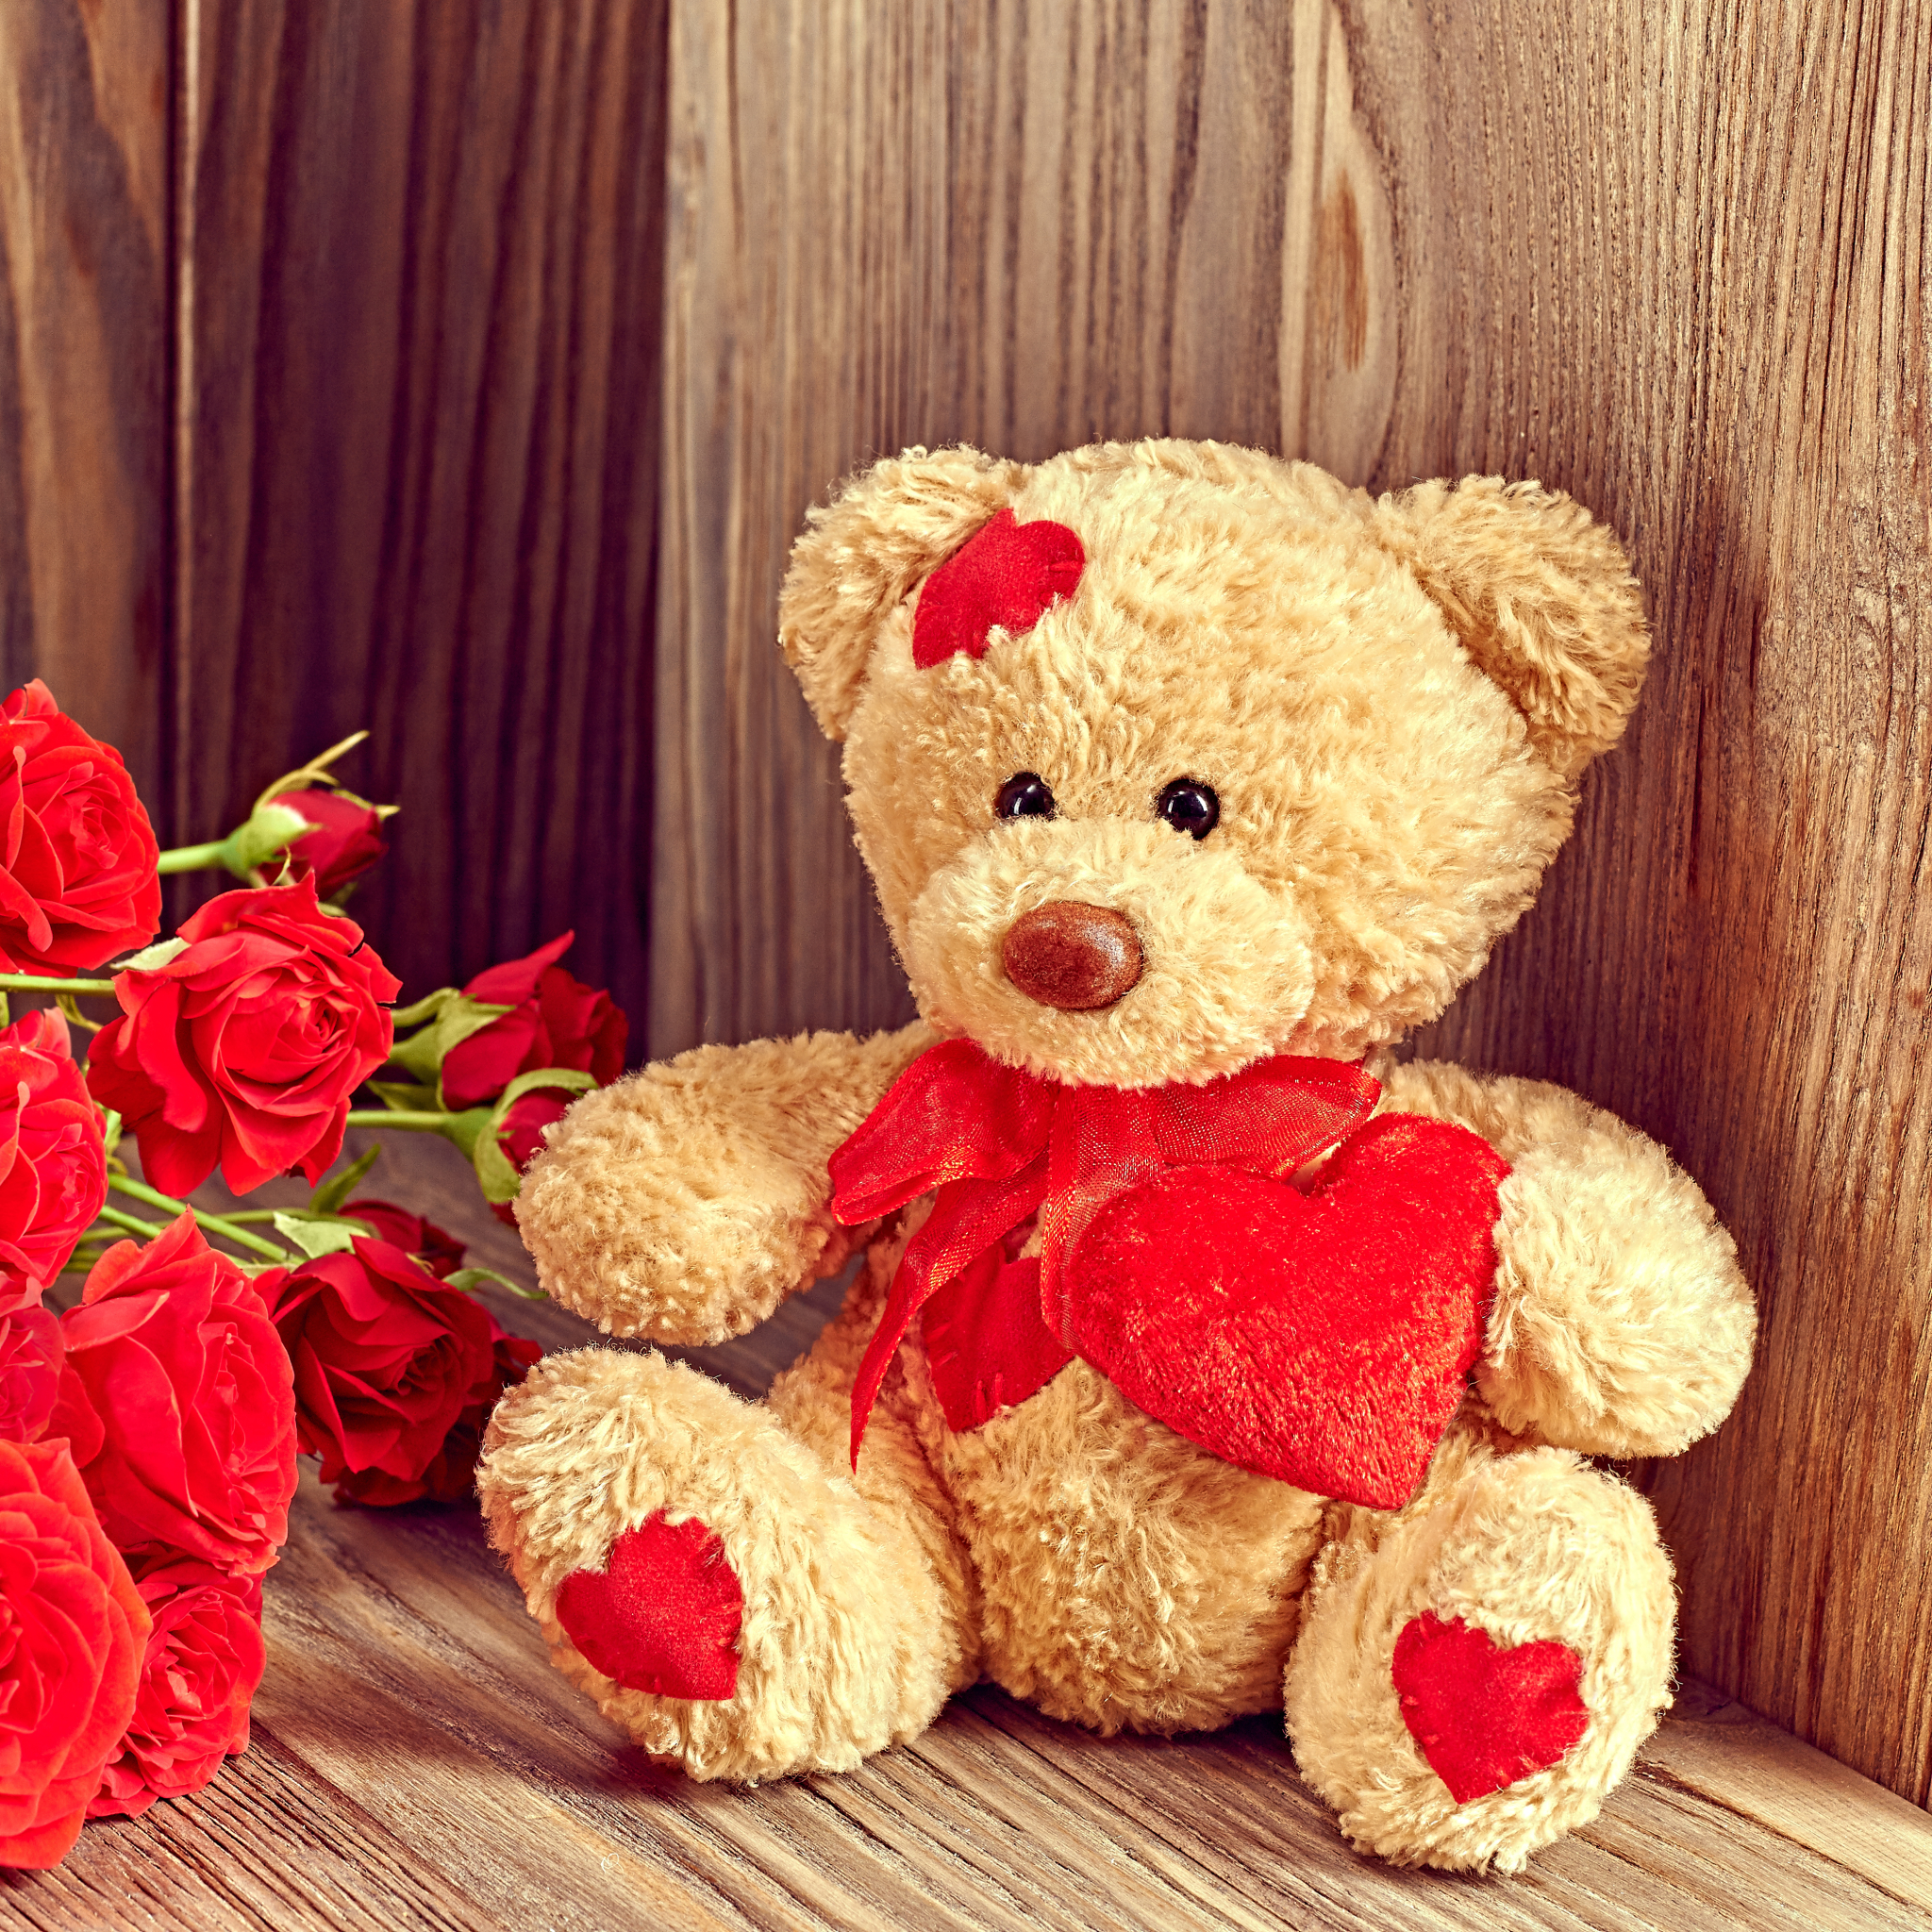 Download Teddy Bear In A Red Basket Wallpaper | Wallpapers.com